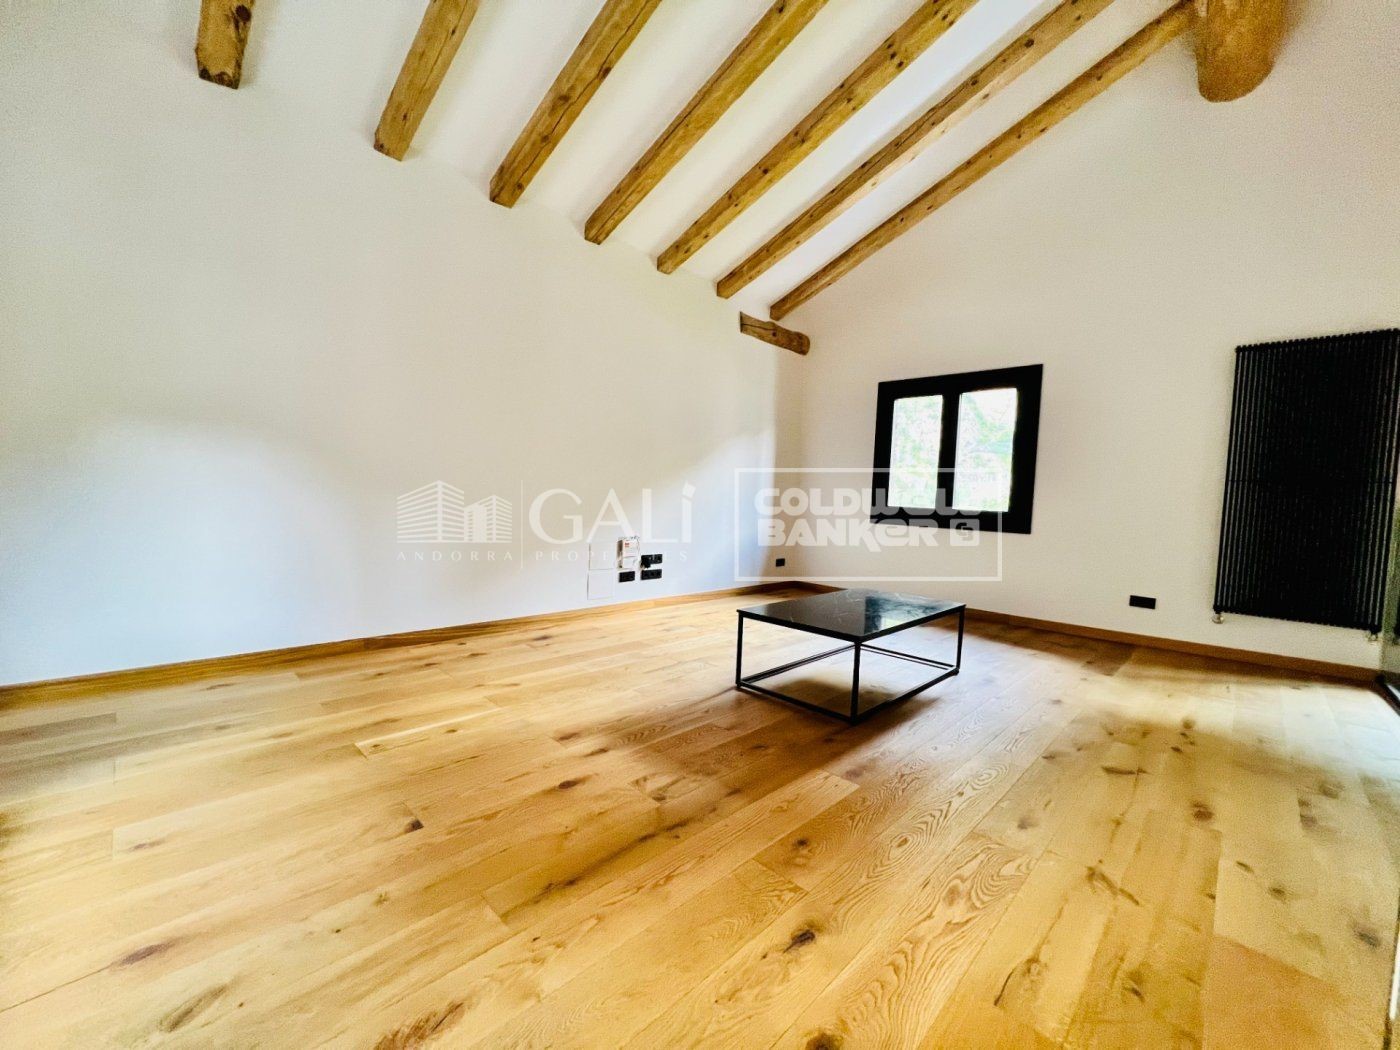 Terraced House 4 Bedrooms Rent Canillo